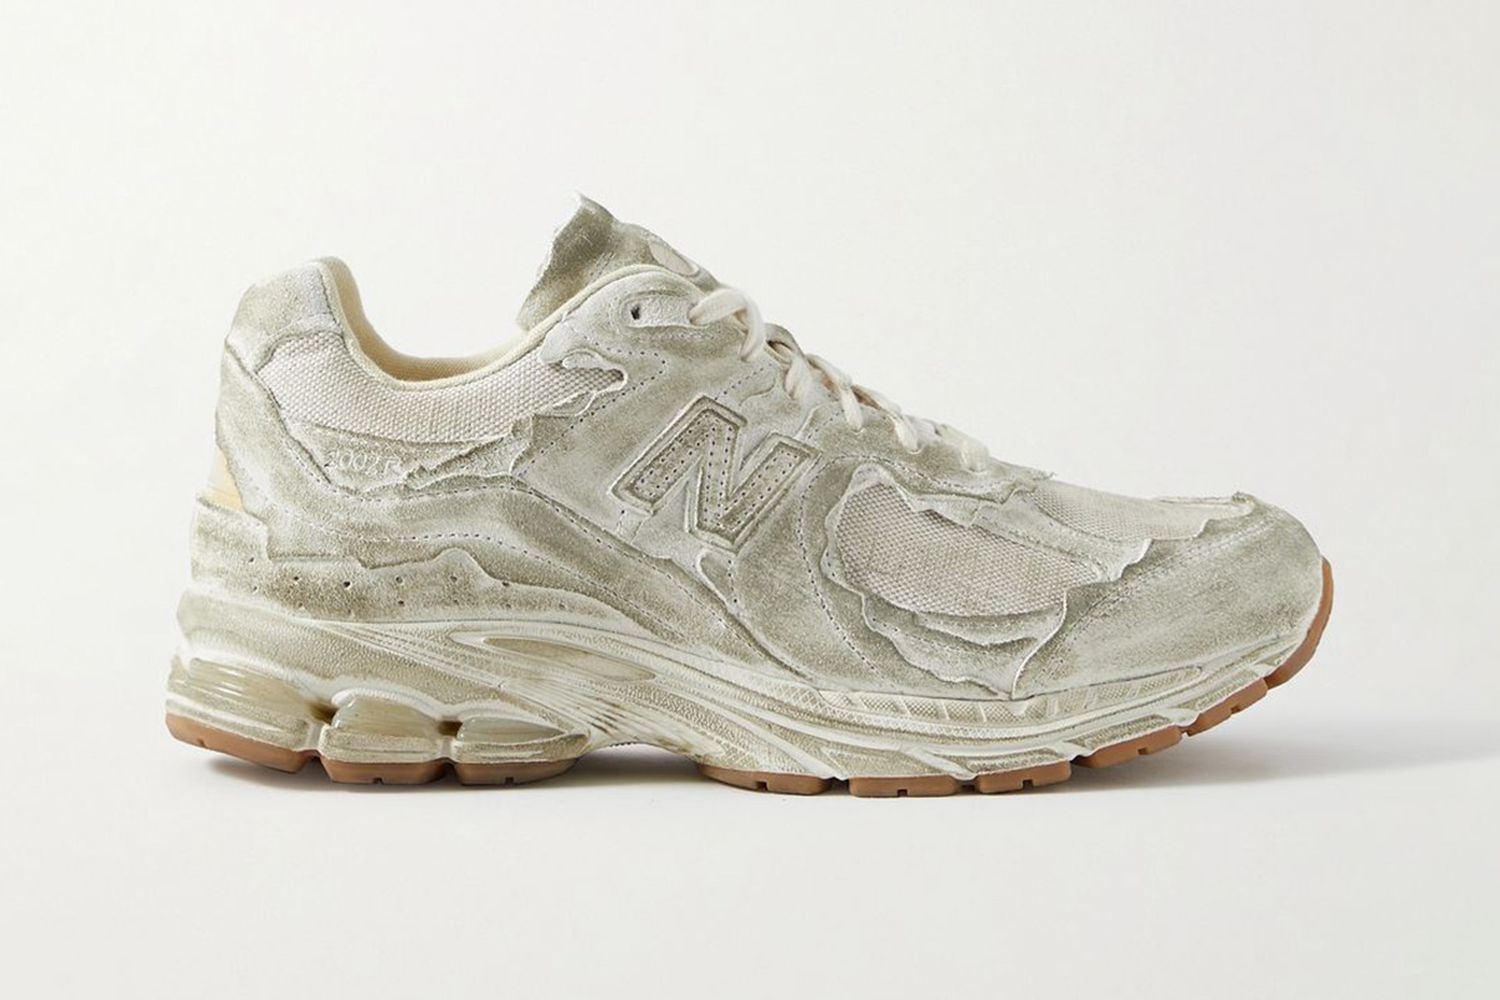 13 New Balance Sneakers Available to Buy Right